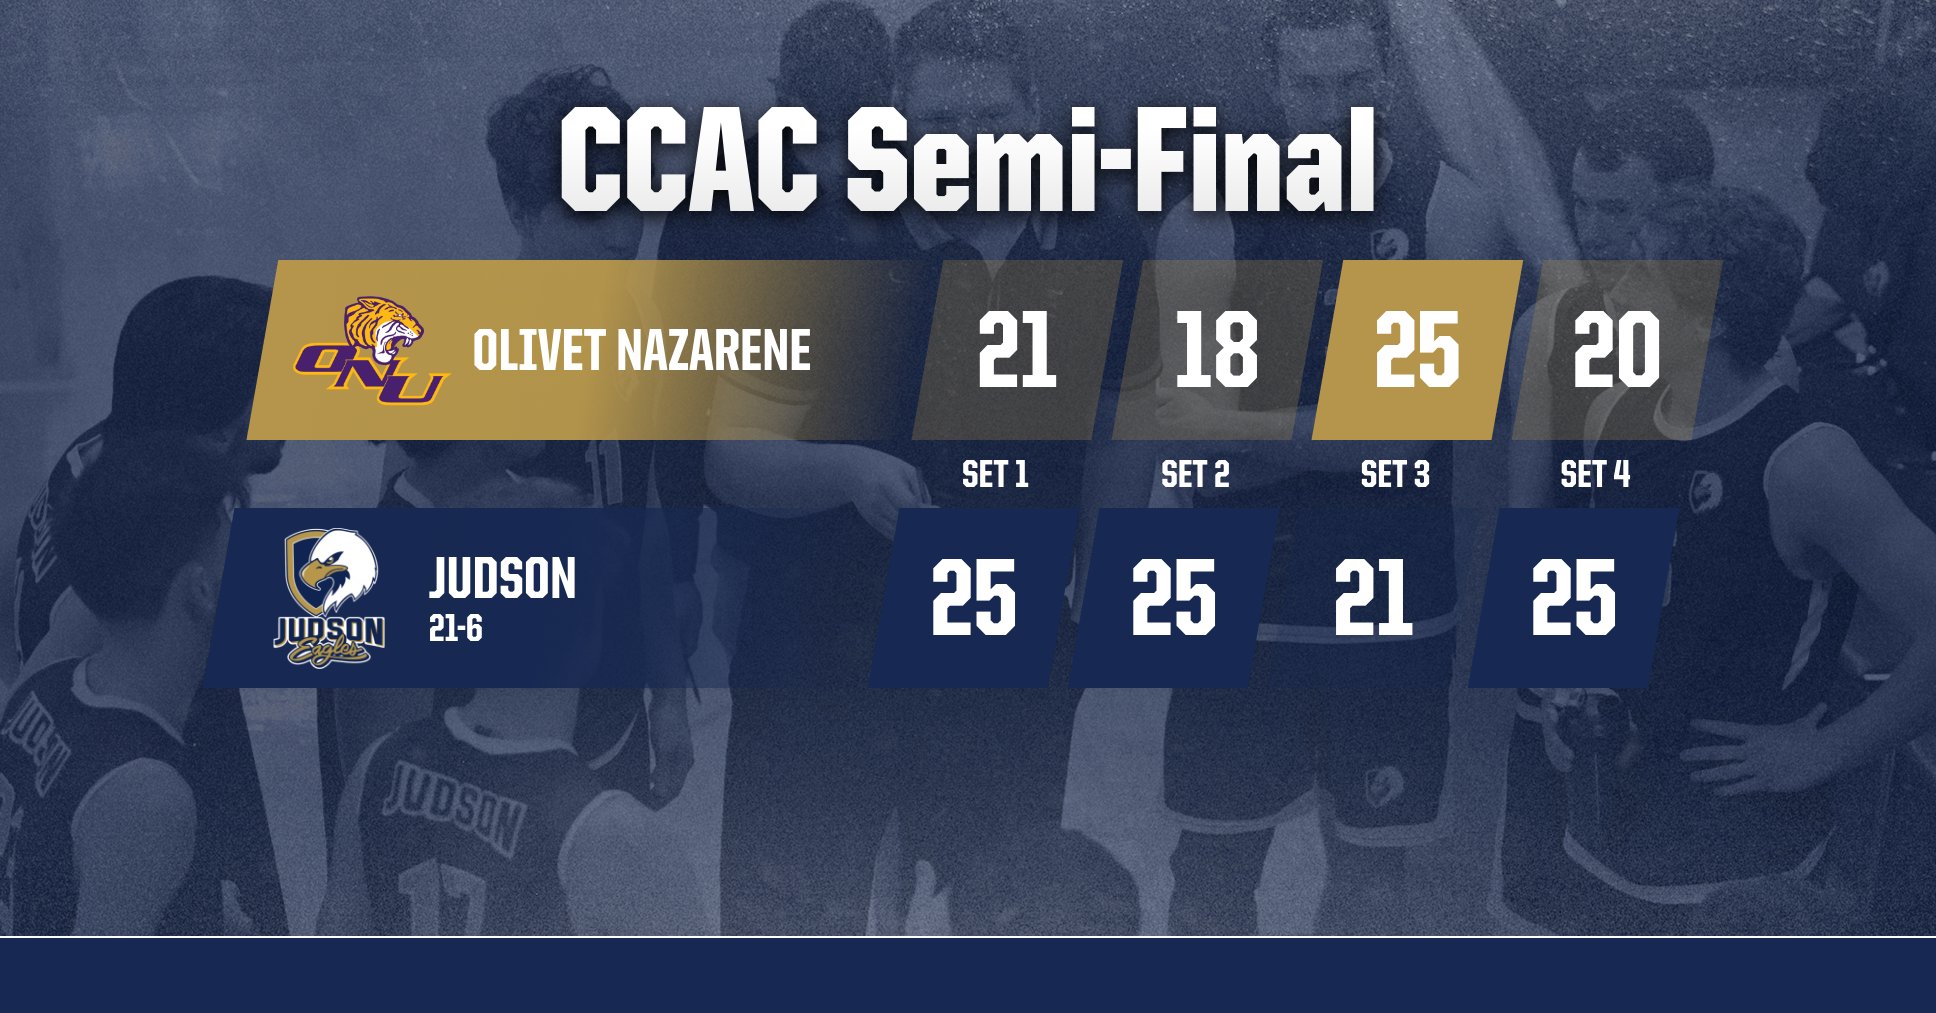 Eagles Advance to Second Consecutive CCAC Title Match with Four-Set Win over Olivet Nazarene